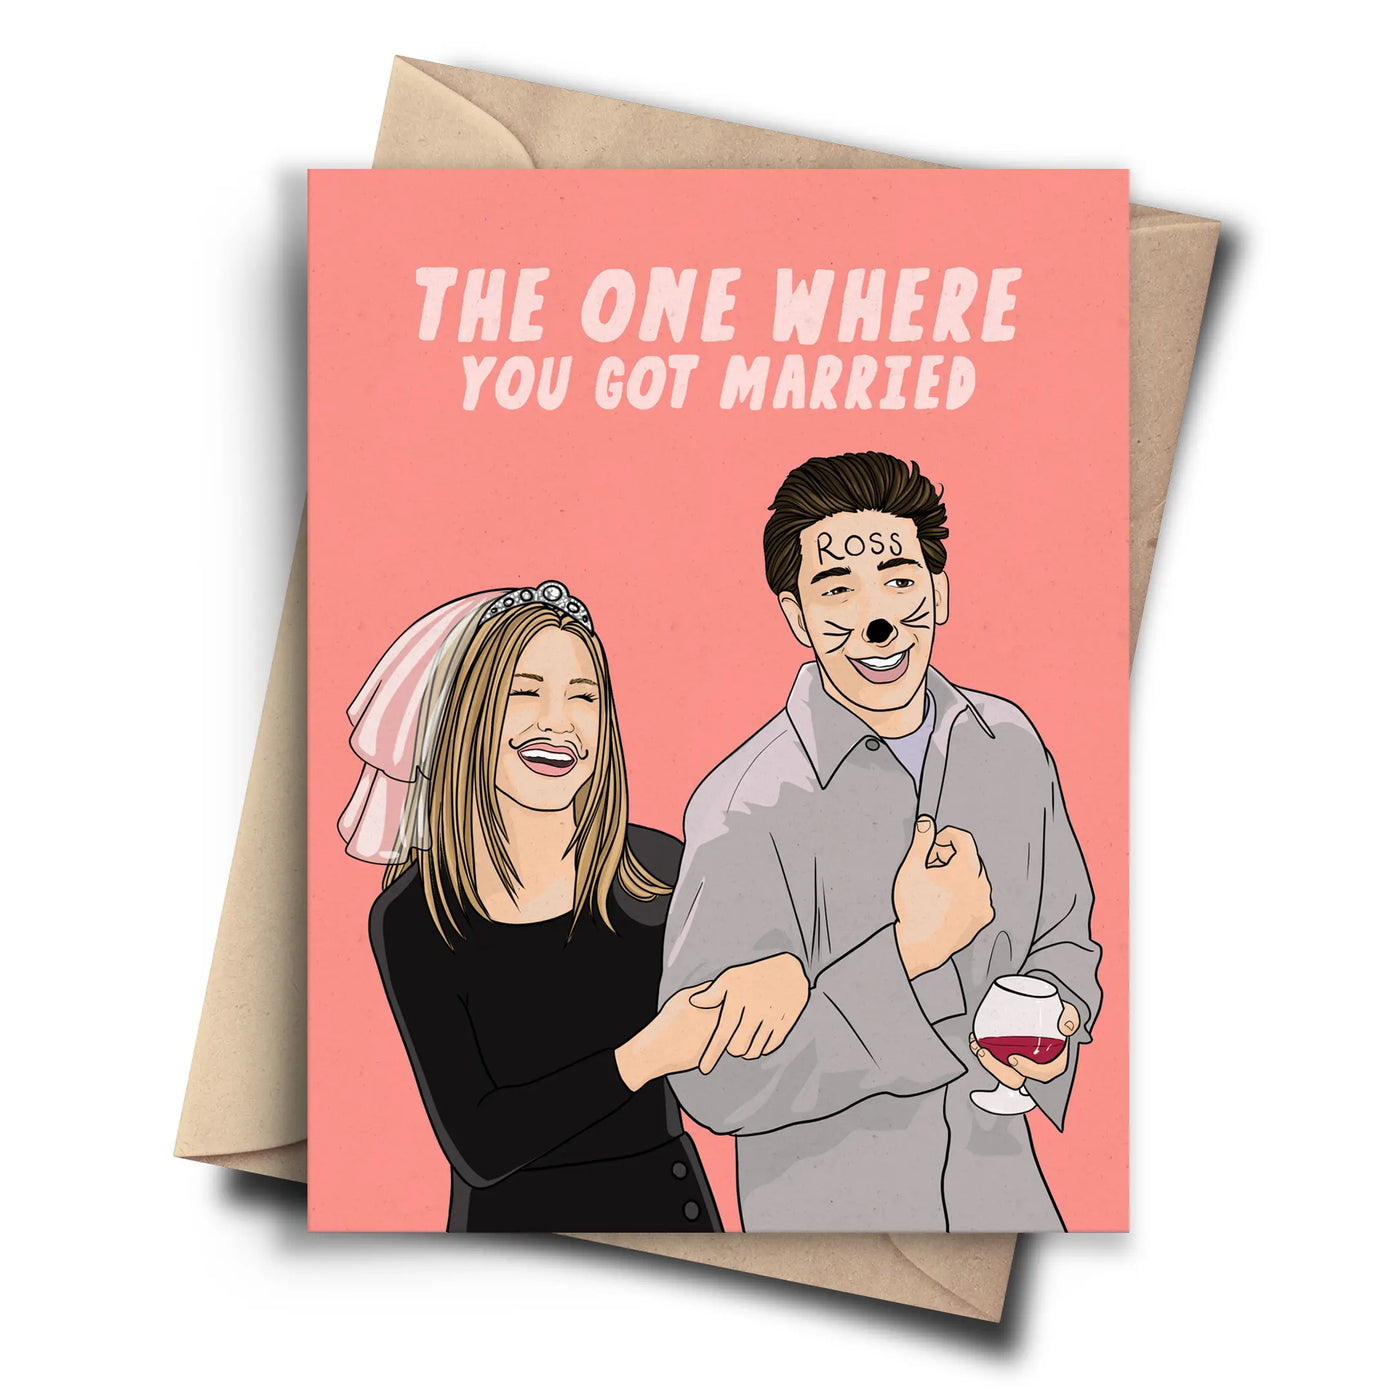 "THE ONE WHERE YOU GOT MARRIED" CARD